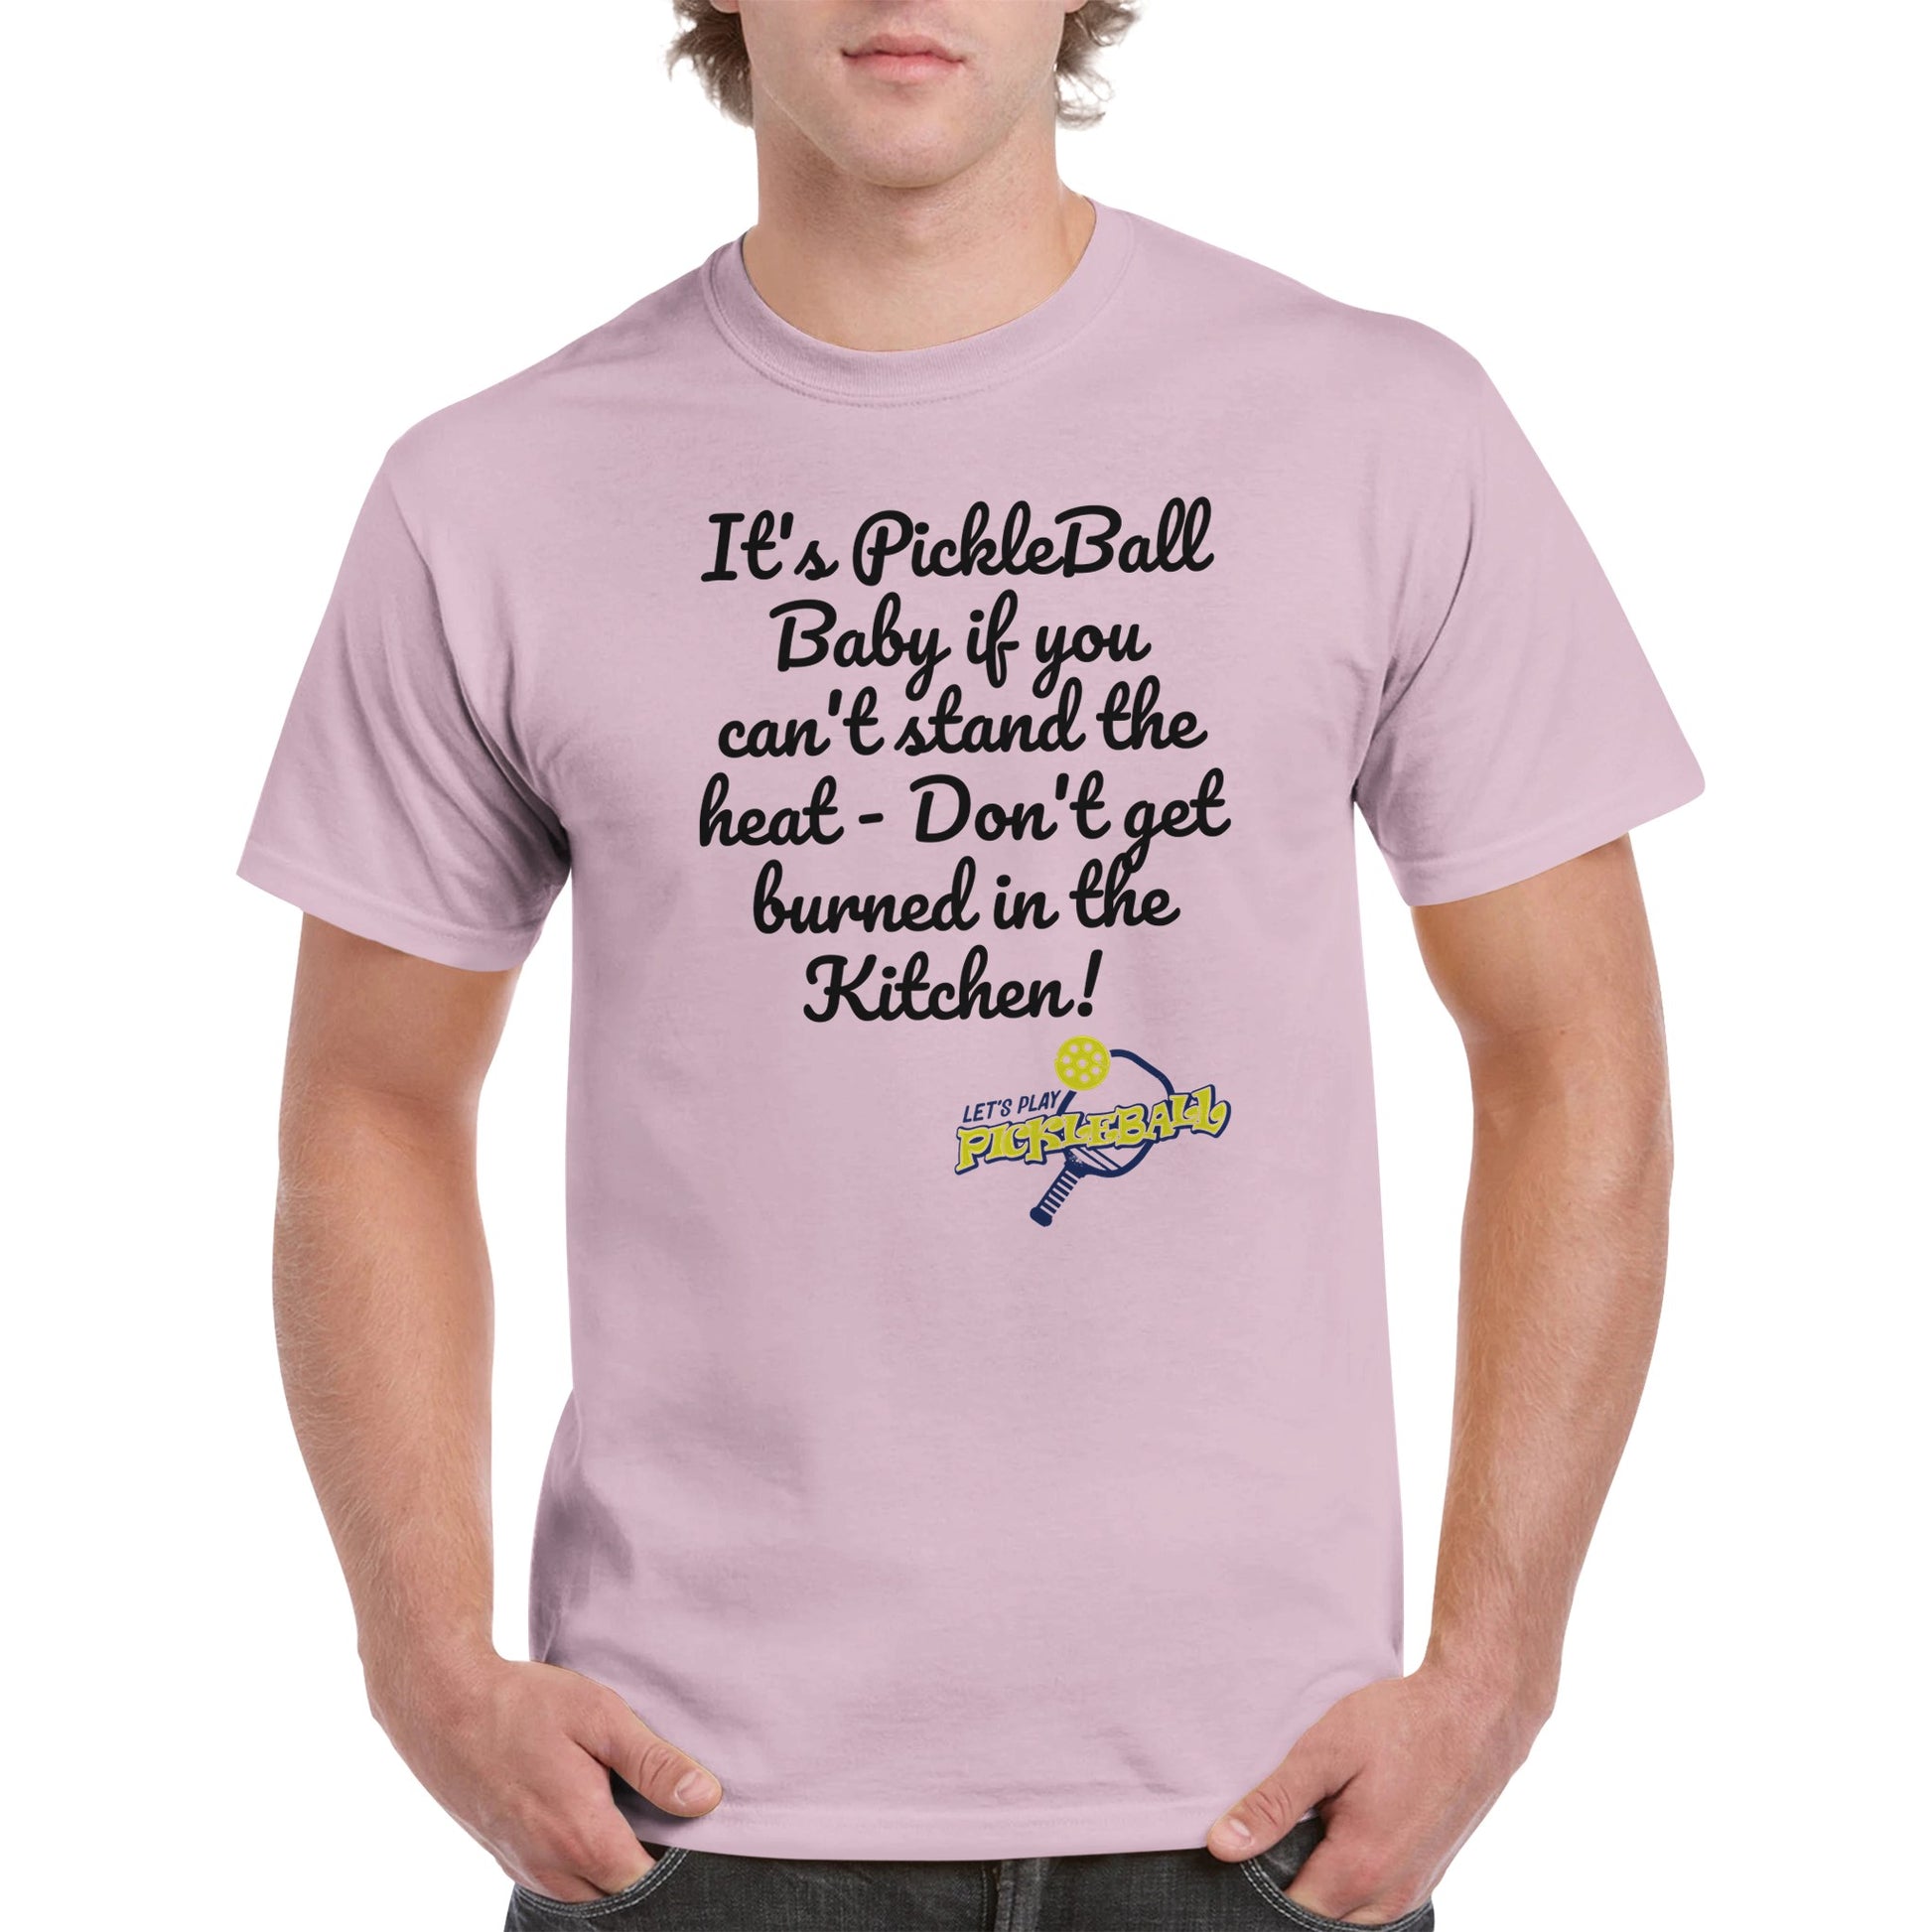 Light pink comfortable Unisex Crewneck heavyweight cotton t-shirt with funny saying It’s PickleBall Baby if can’t stand the heat – Don’t get burned in the Kitchen!  and Let’s Play Pickleball logo on the front from WhatYa Say Apparel worn by blonde-haired male front view.